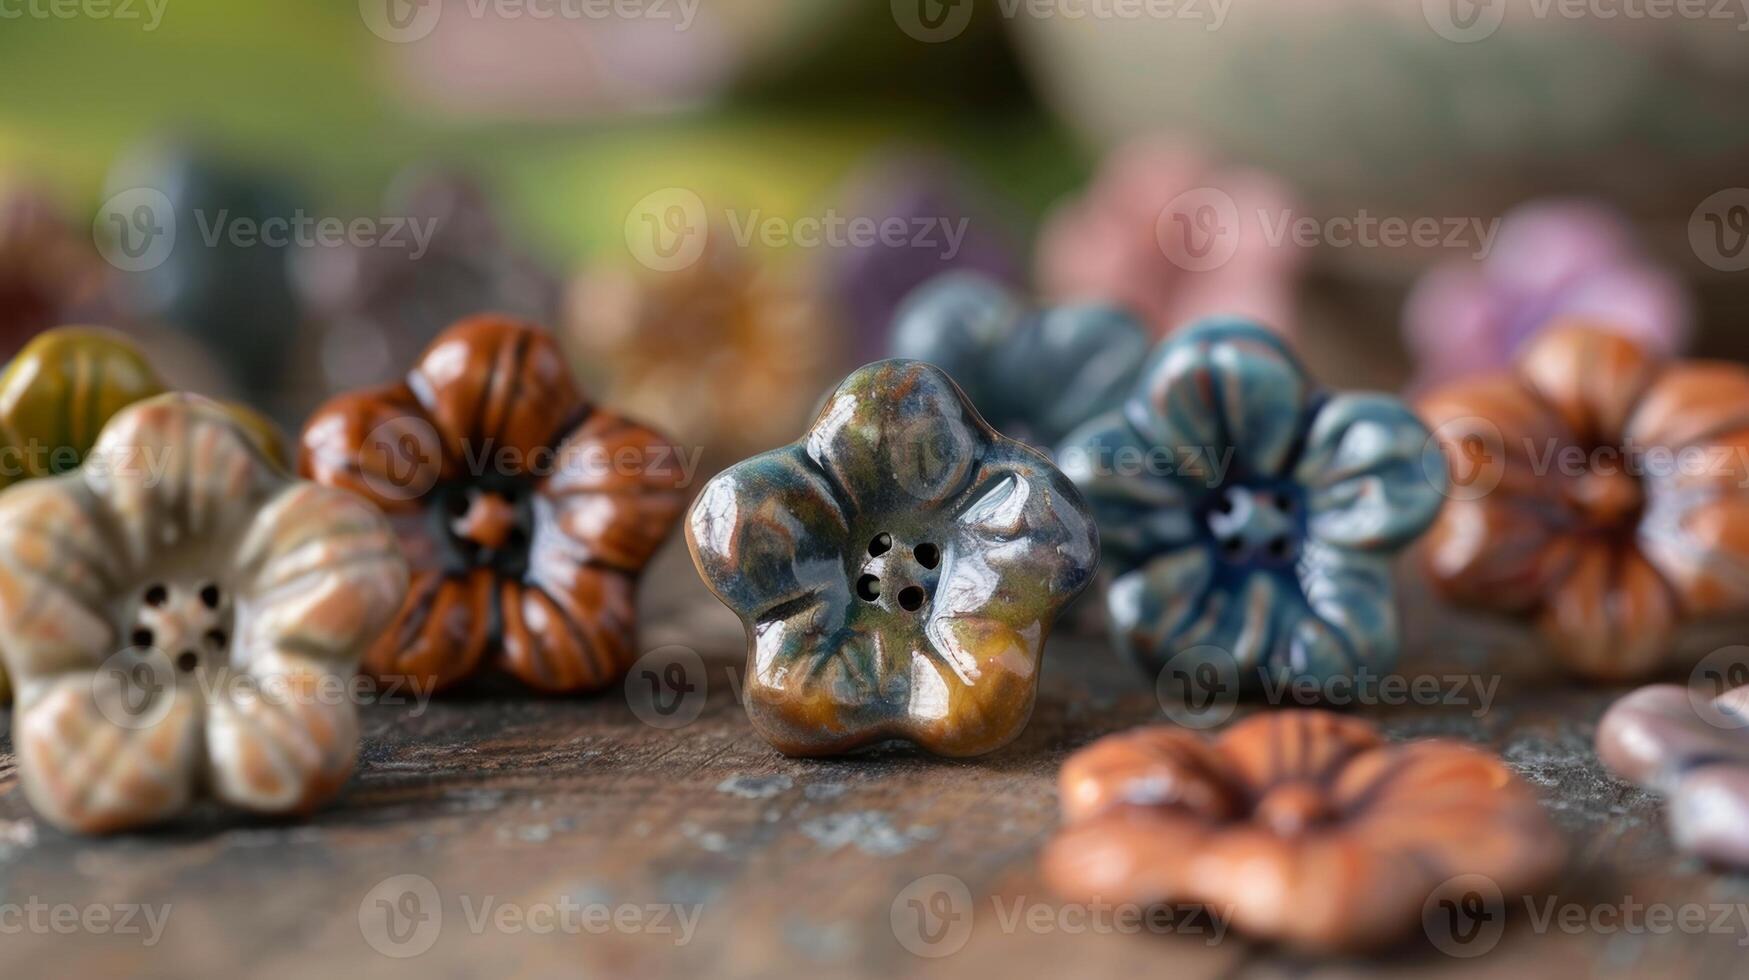 A finished product a ceramic button in the shape of a flower perfect for embellishing a homemade top or blouse. photo